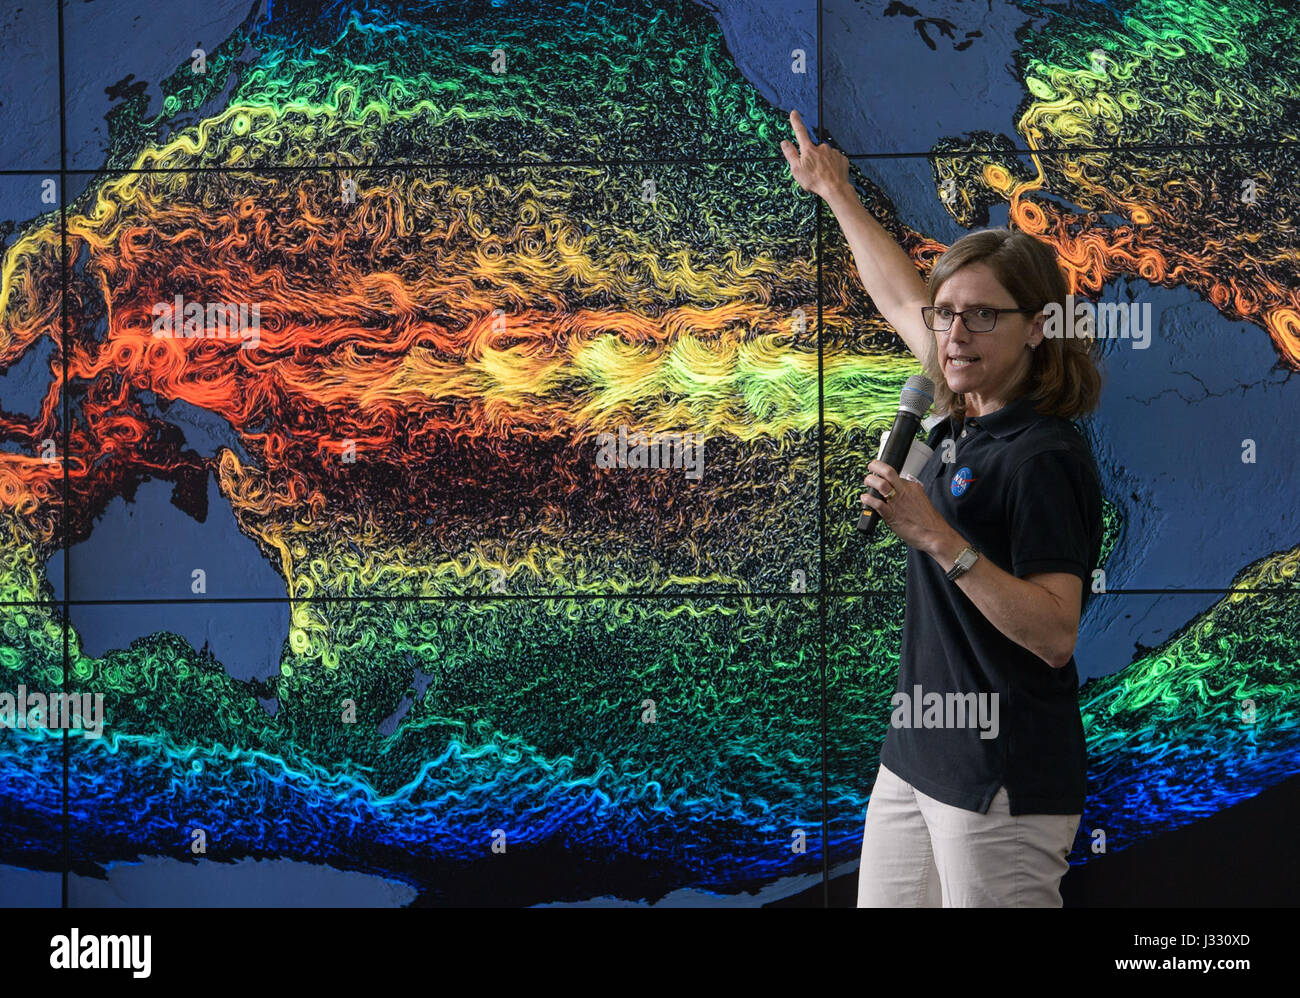 Stephanie Uz, a research oceanographer at NASA's Goddard Spaceflight Center speaks about life in the Pacific Ocean during NASA's Earth Day event on Thursday, April 20, 2017 at Union Station in Washington, D.C. Stock Photo